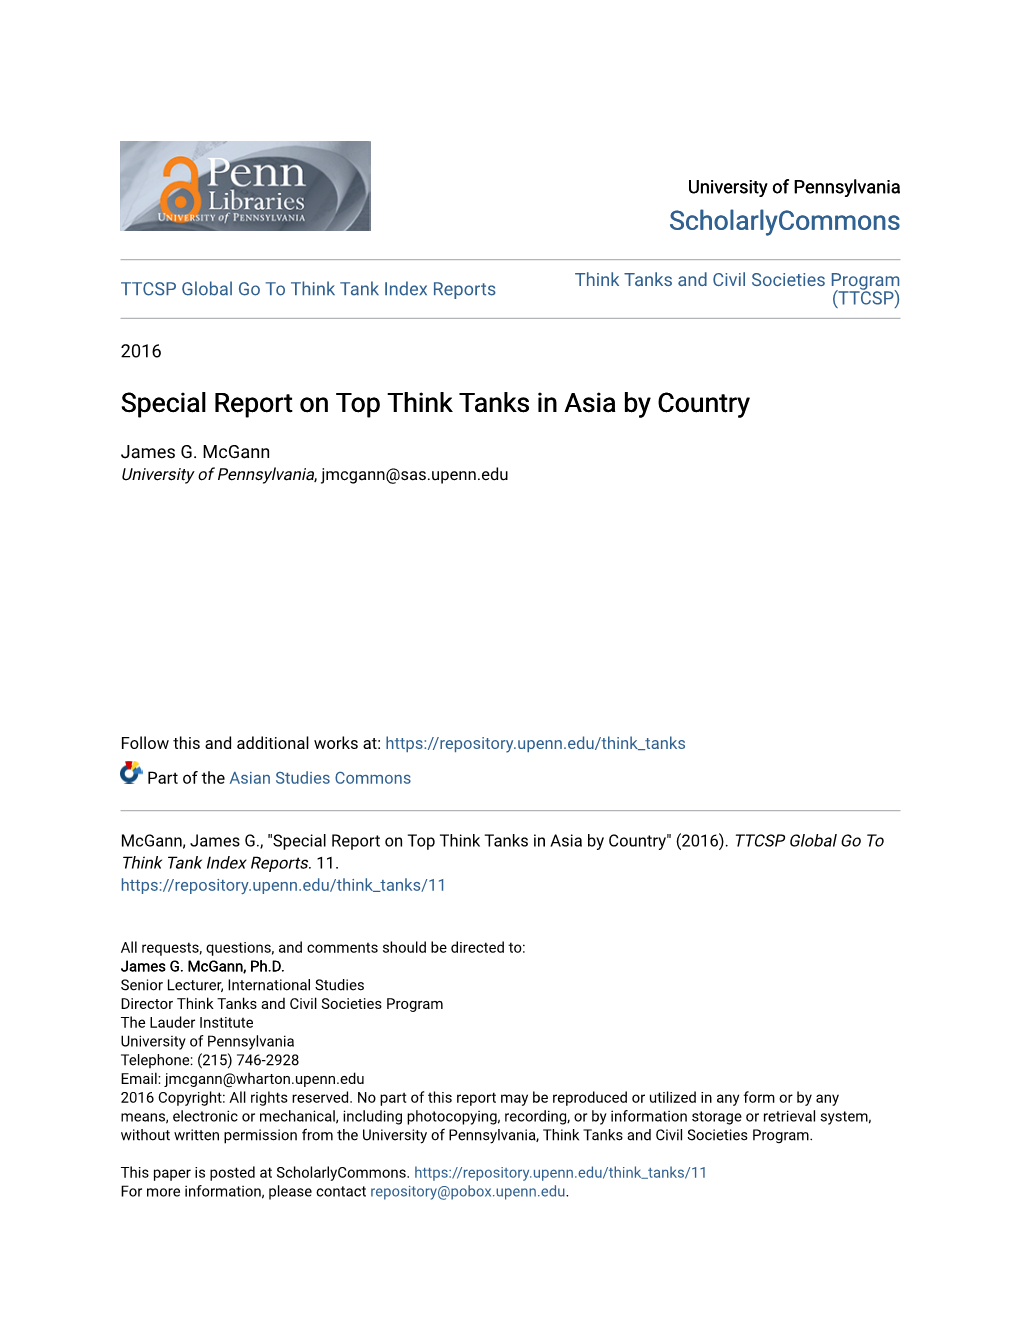 Special Report on Top Think Tanks in Asia by Country